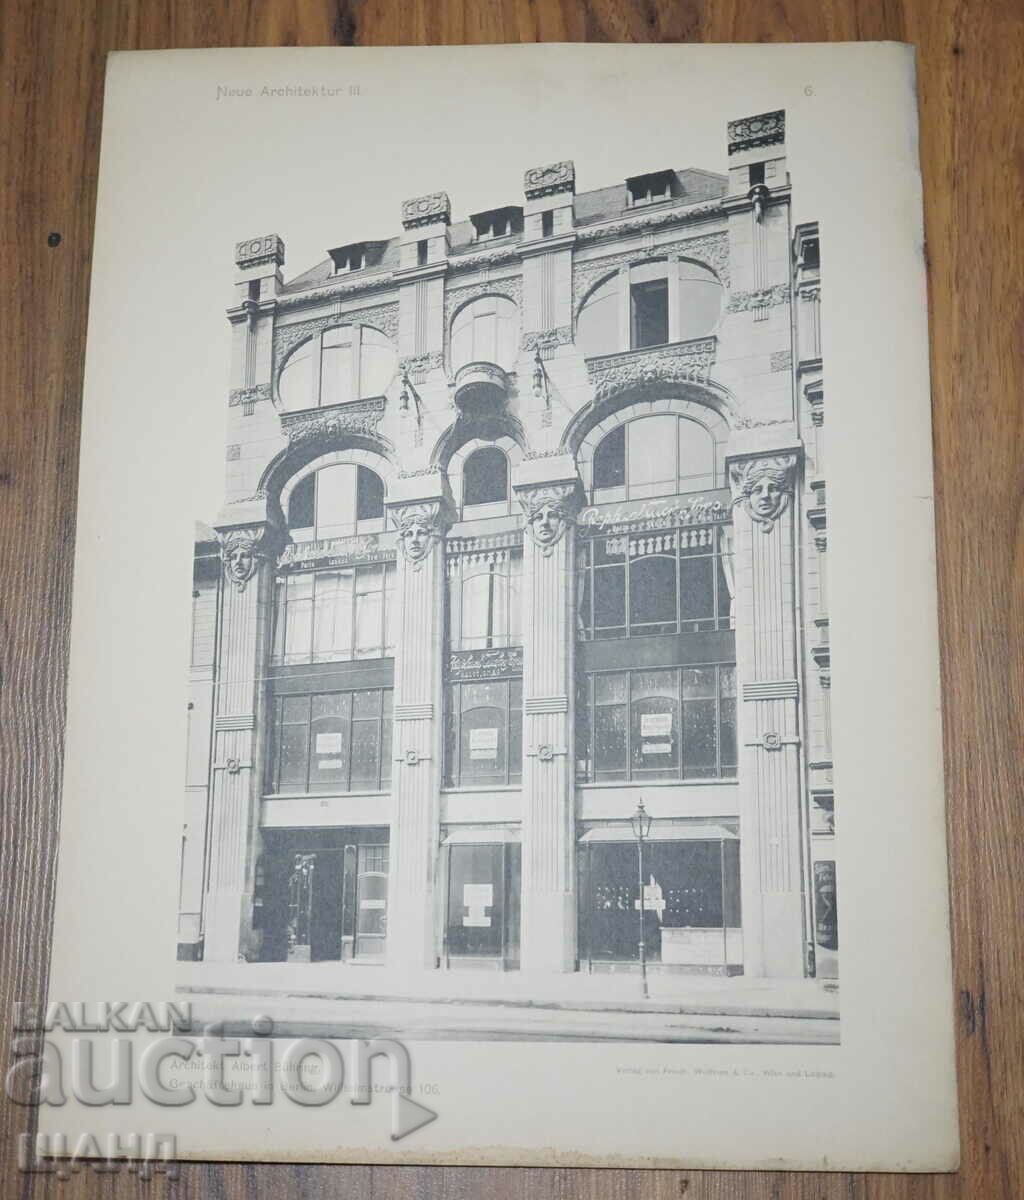 1895 Vienna Architectural lithograph of a hotel in Berlin